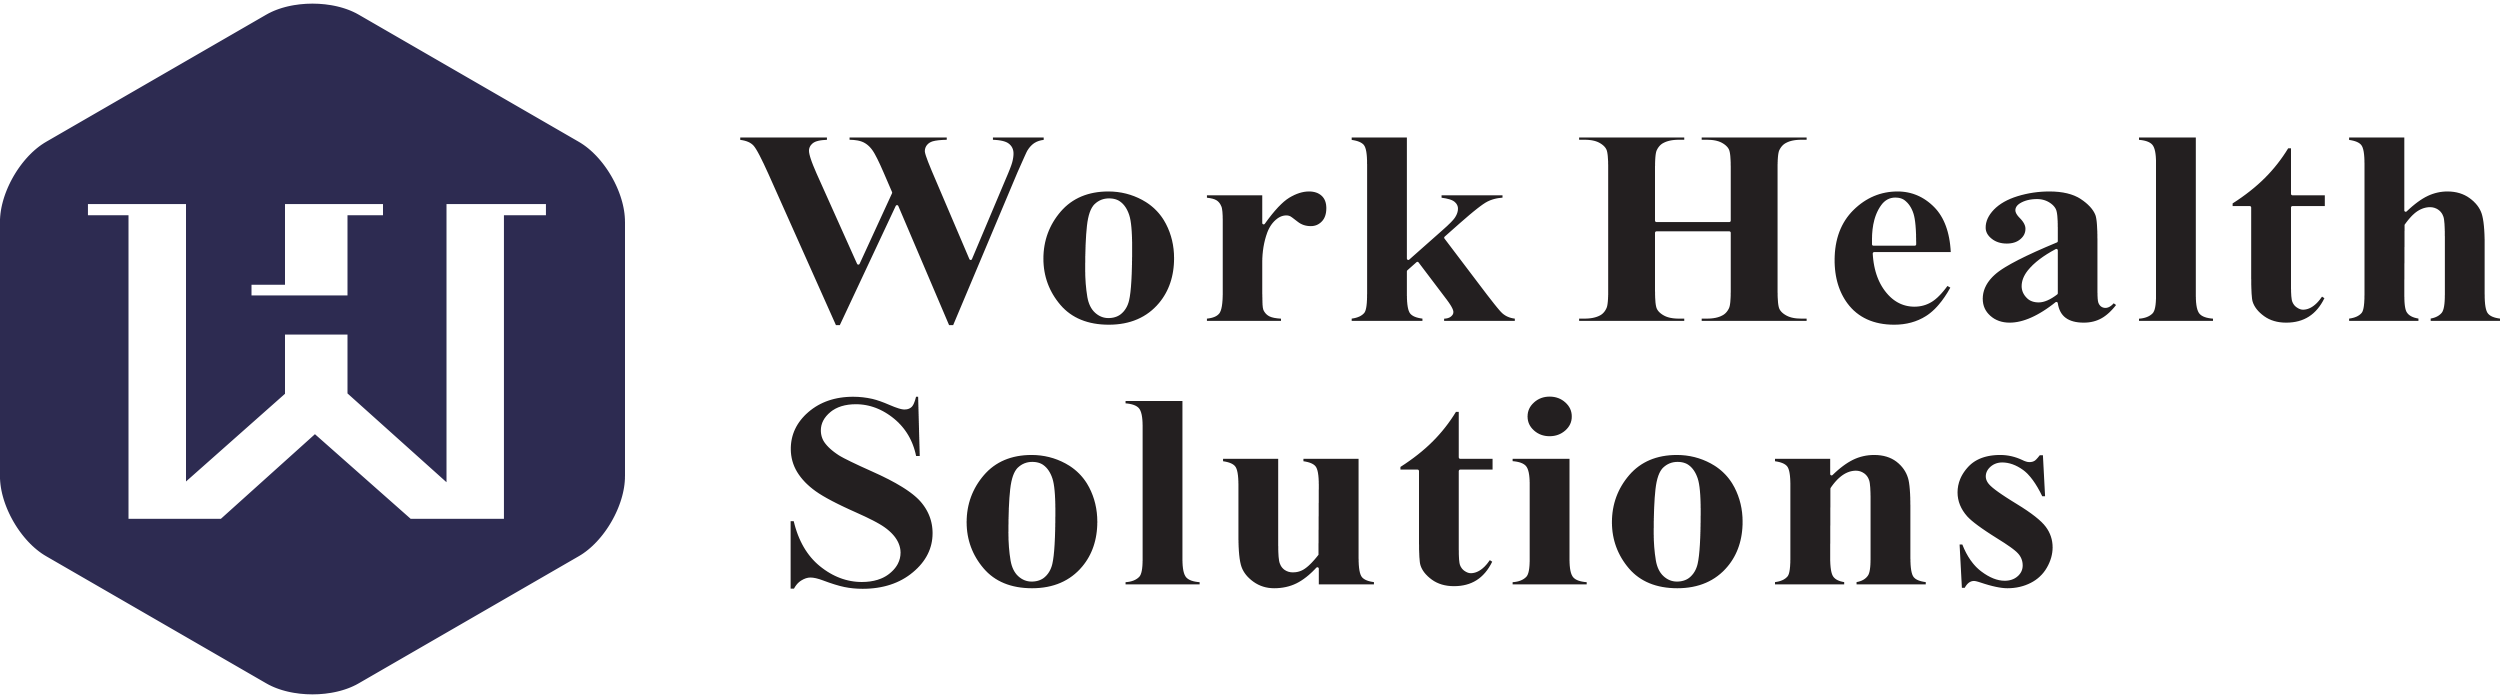 Work Health Solutions